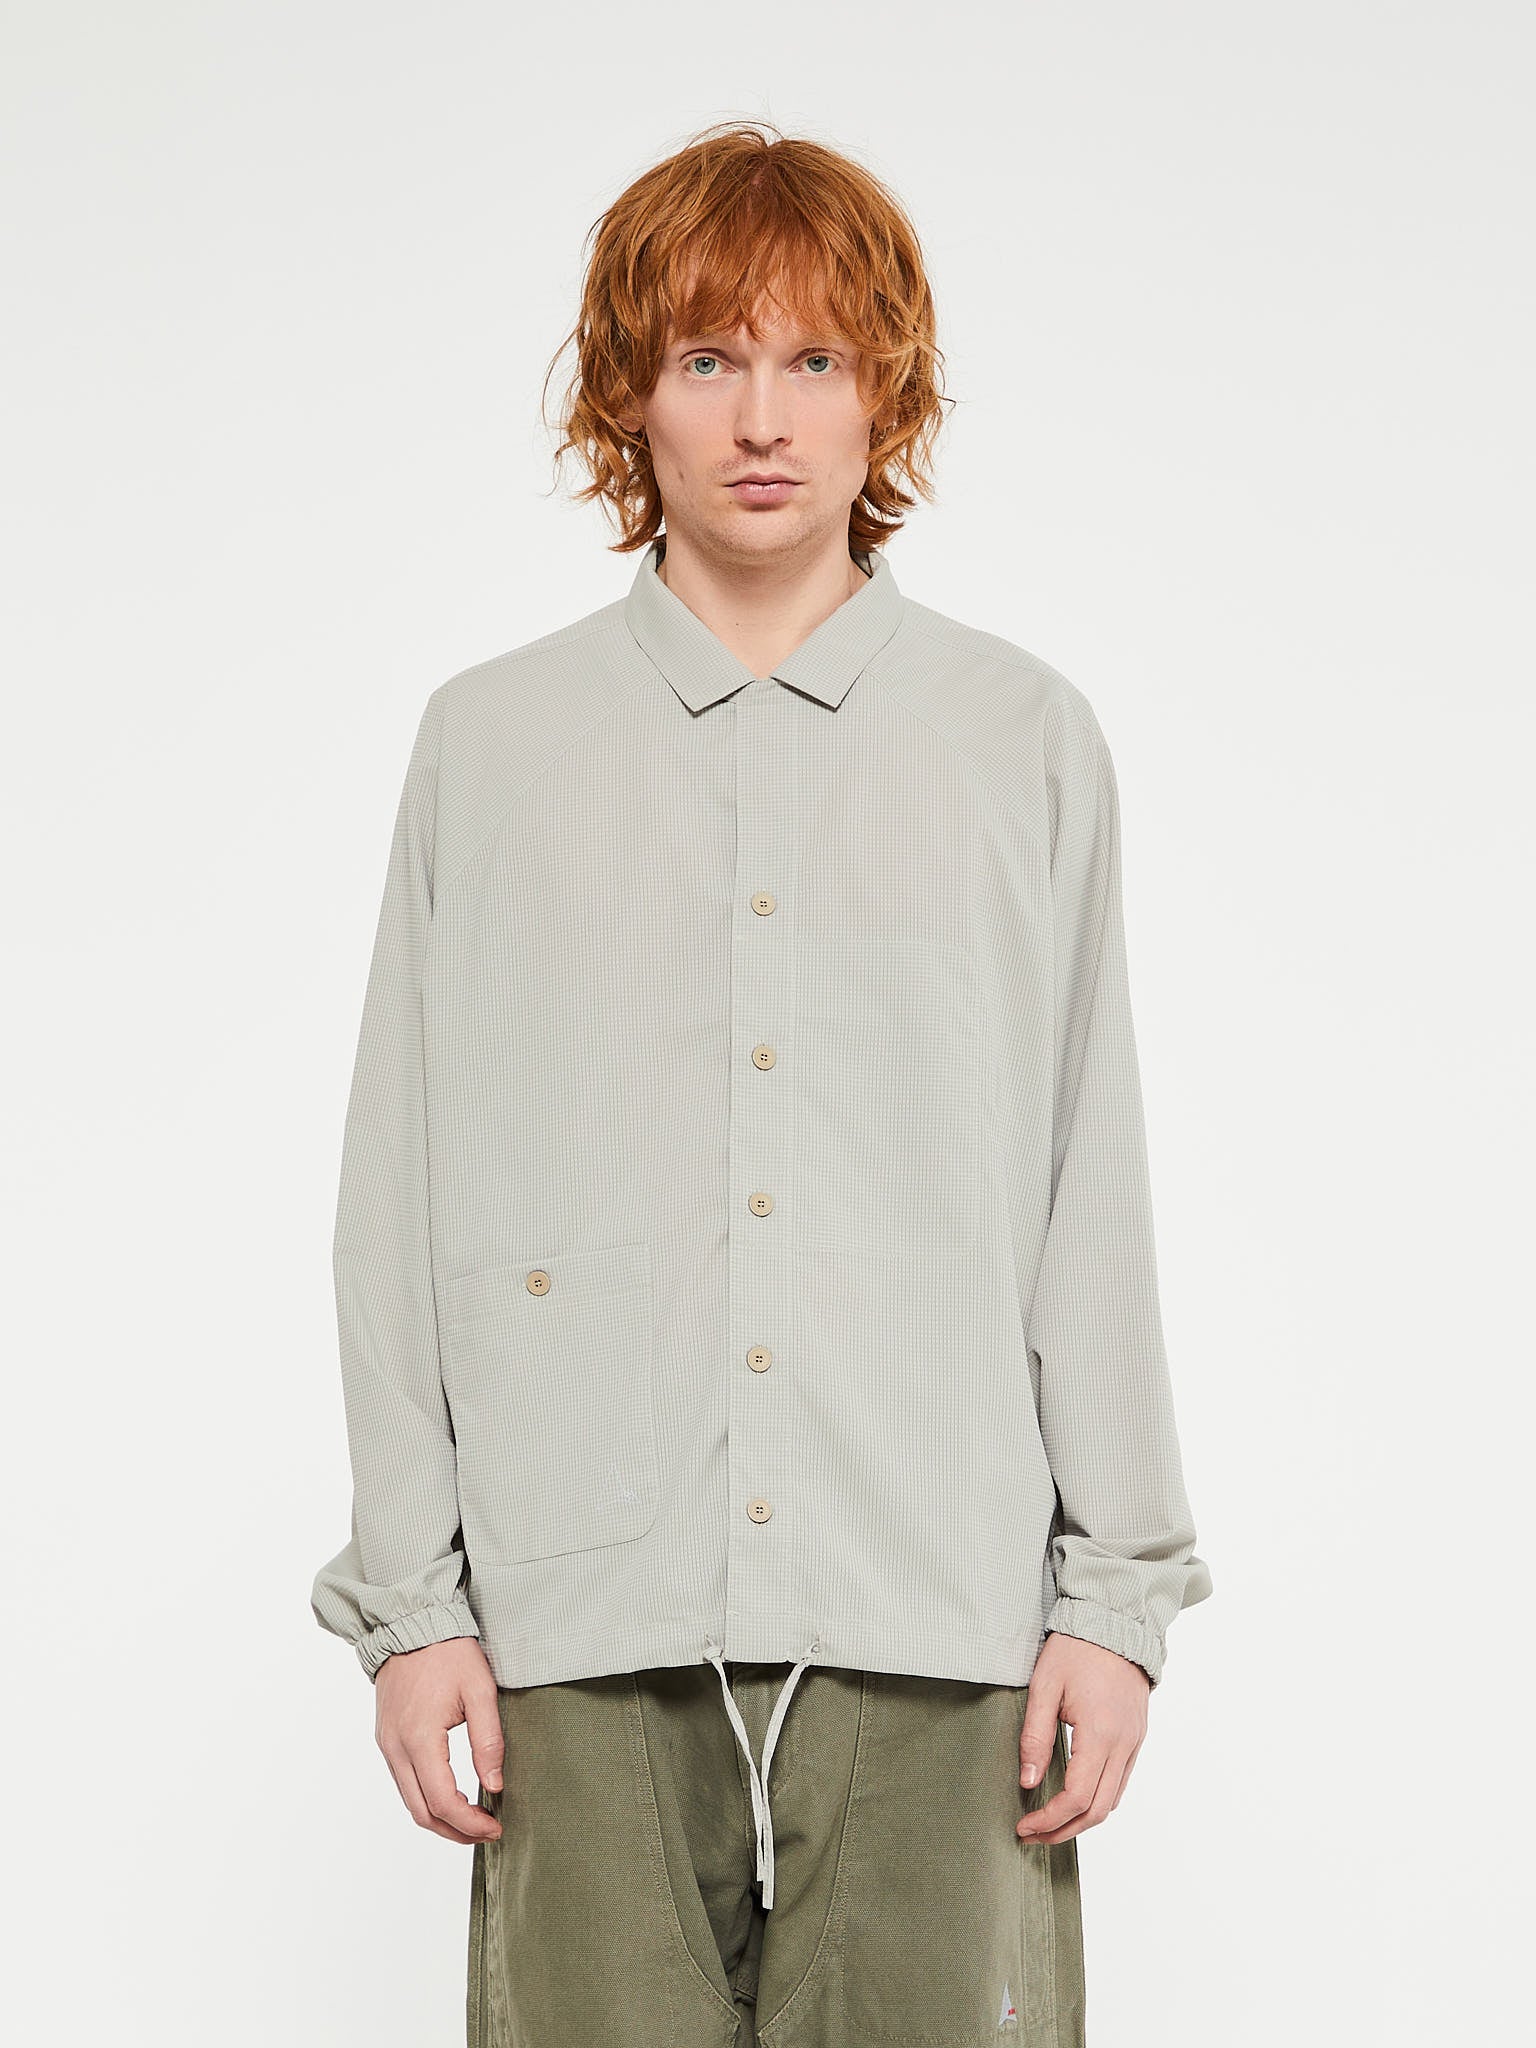 ROA - Perforated Shirt in Green